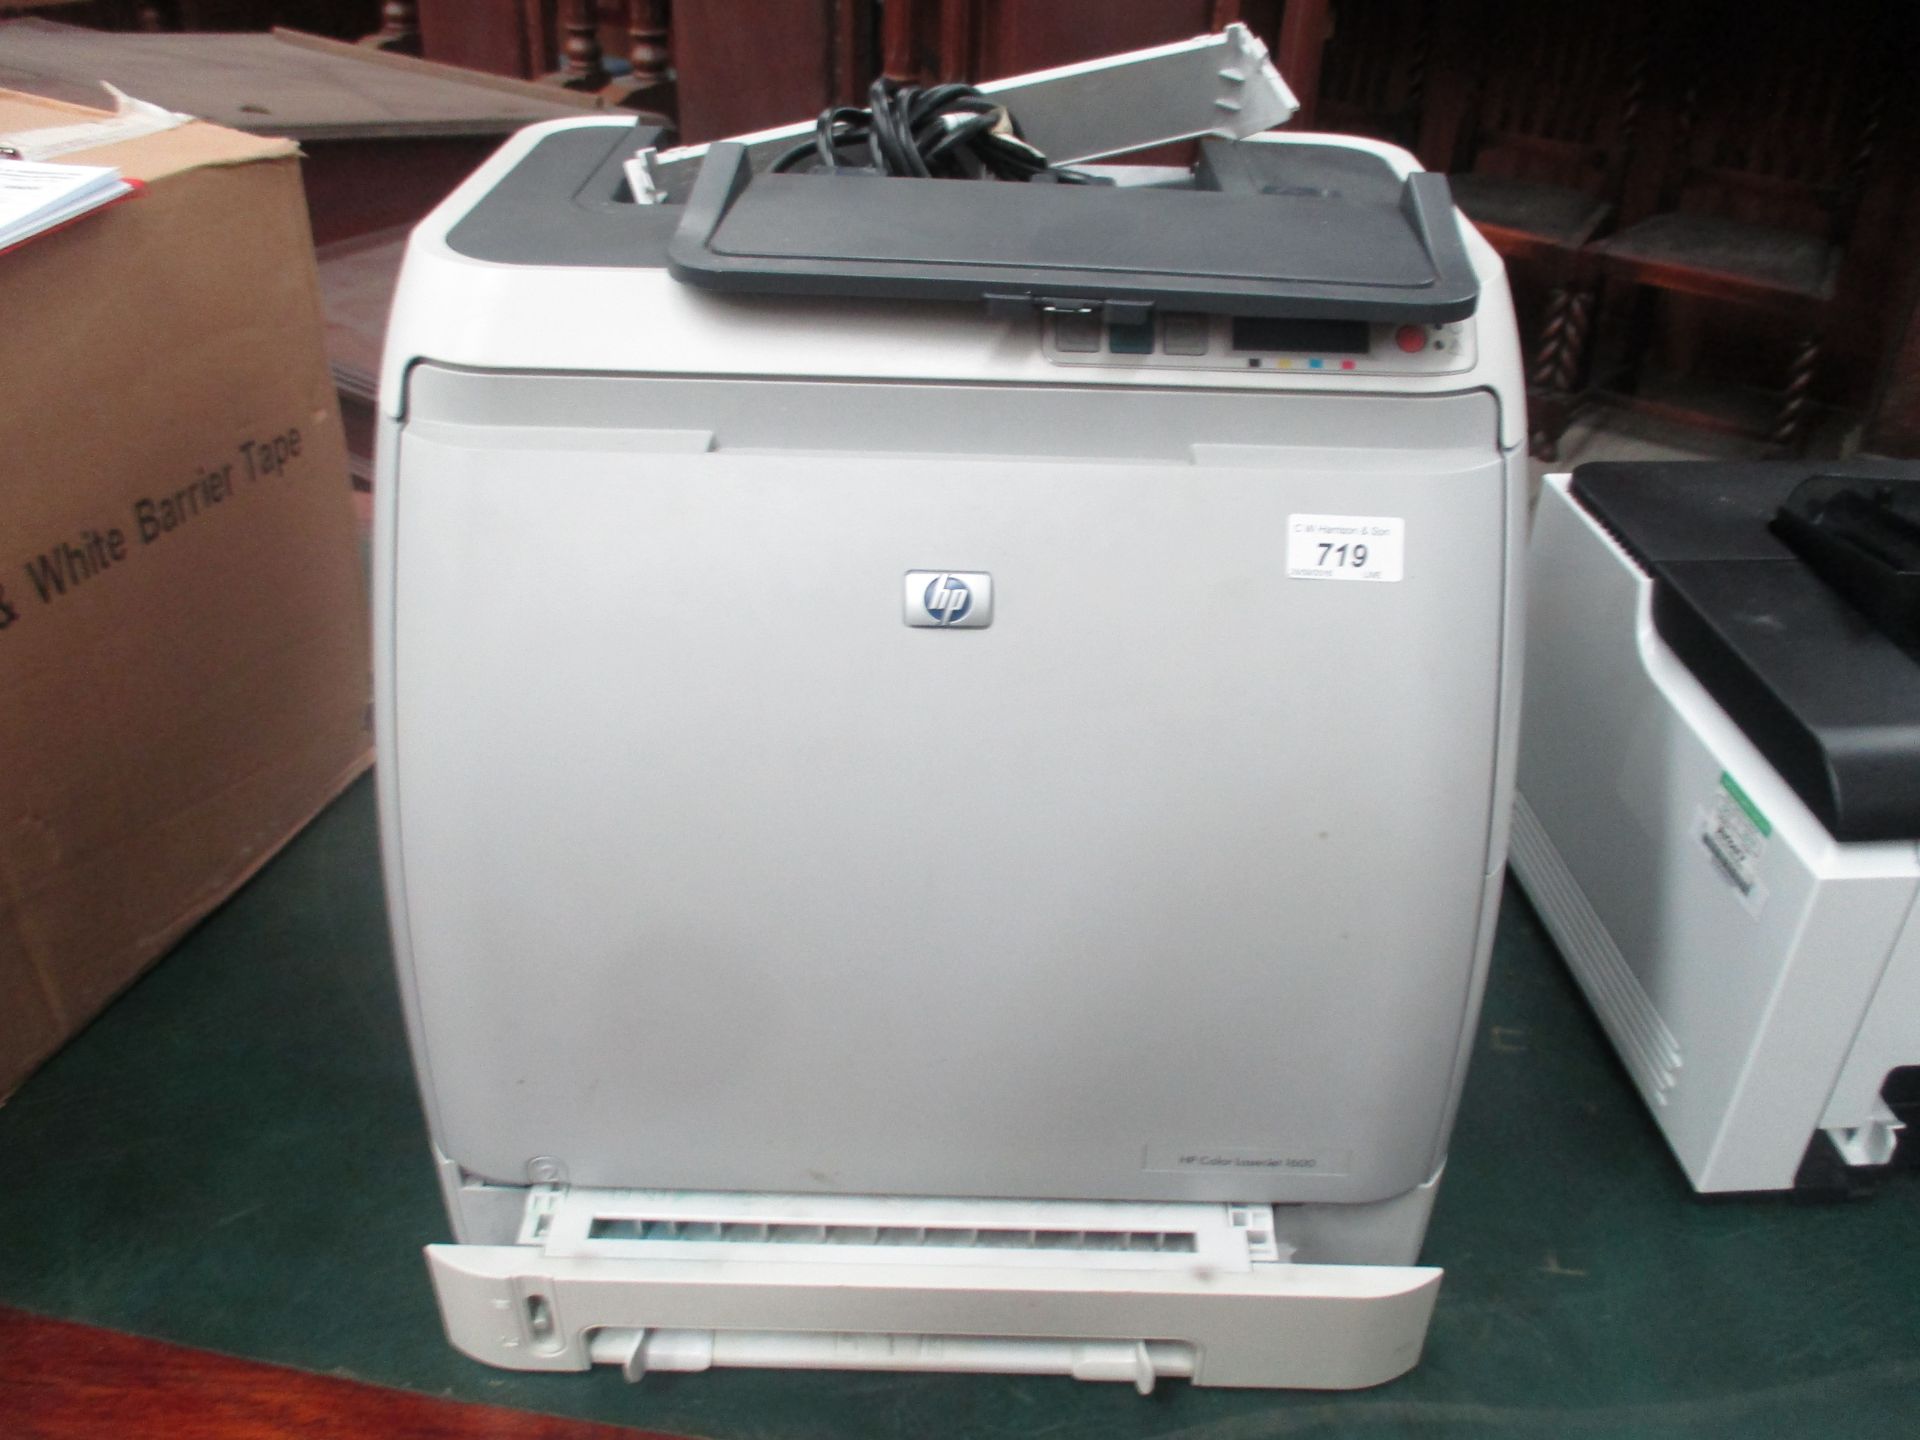 An HP 1600 colour laser jet printer with power lead